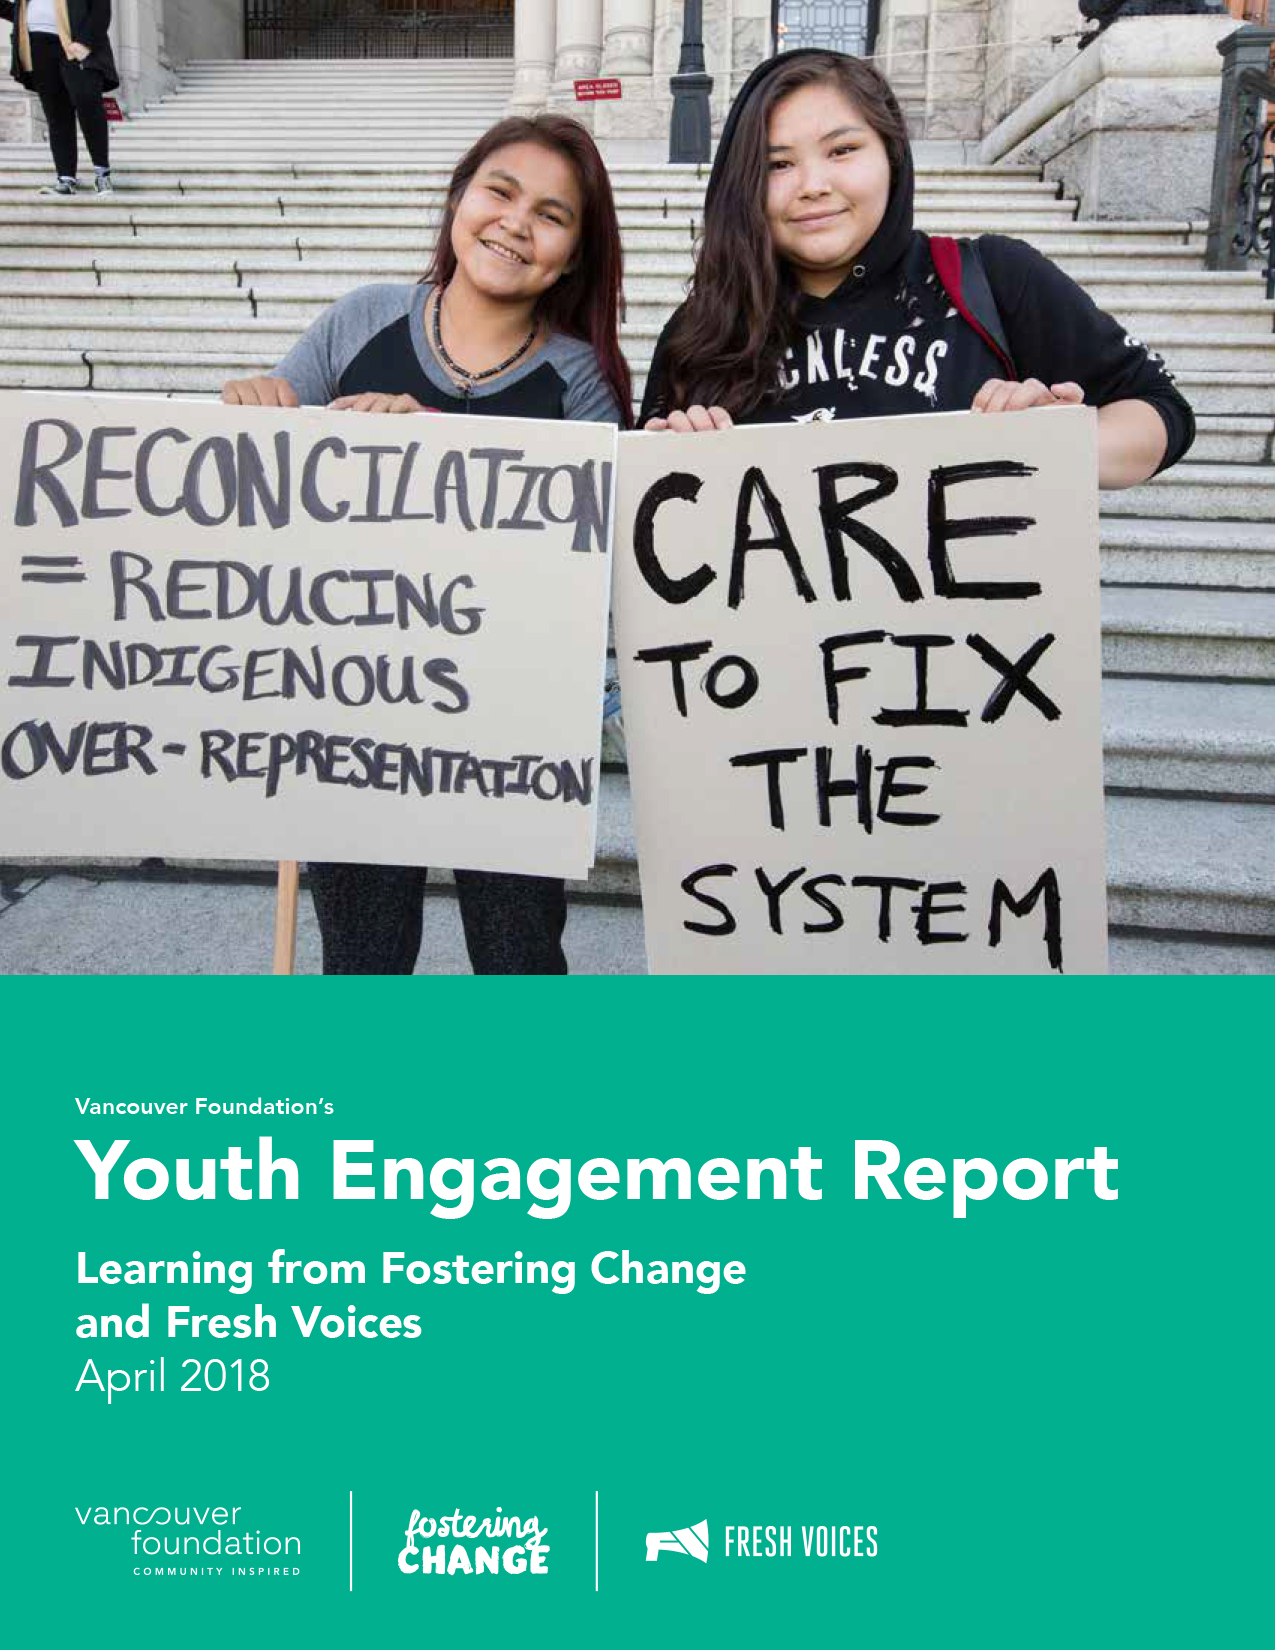 Cover of a publication featuring two young indigenous women, with text underneath reading "Vancouver Foundation Youth Engagement Report, Learning from Fostering Change and Fresh Voices, April 2018"